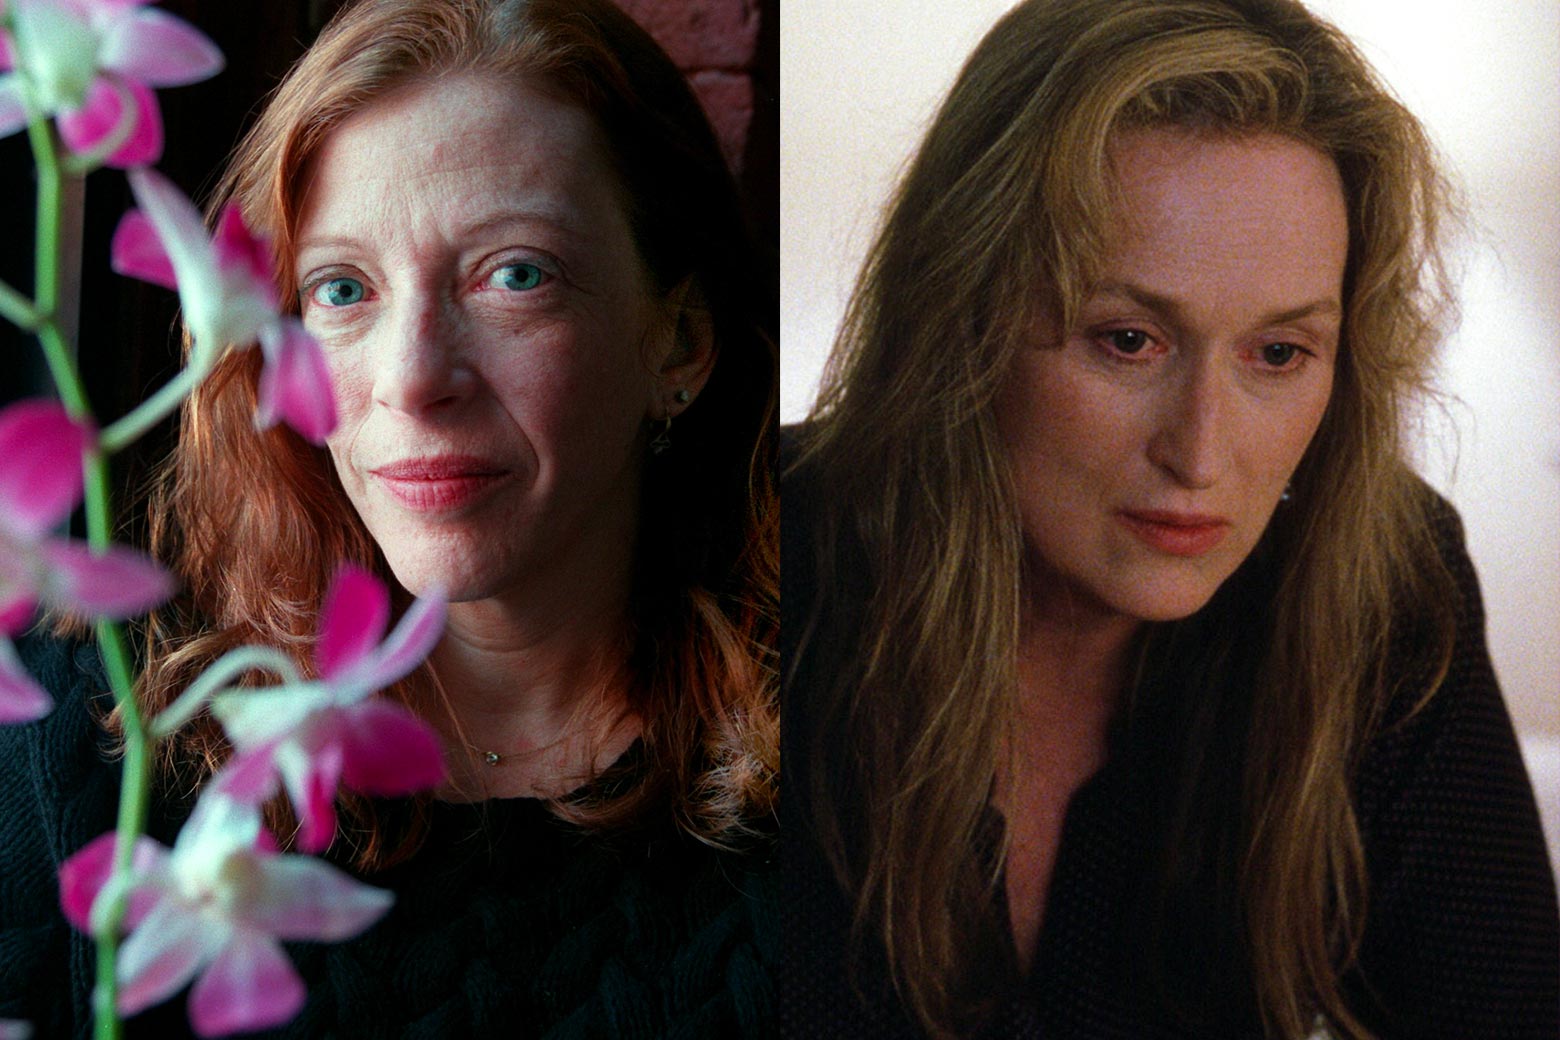 Susan Orlean side by side with the fictional "Susan Orlean" played by Meryl Streep in Adaptation.